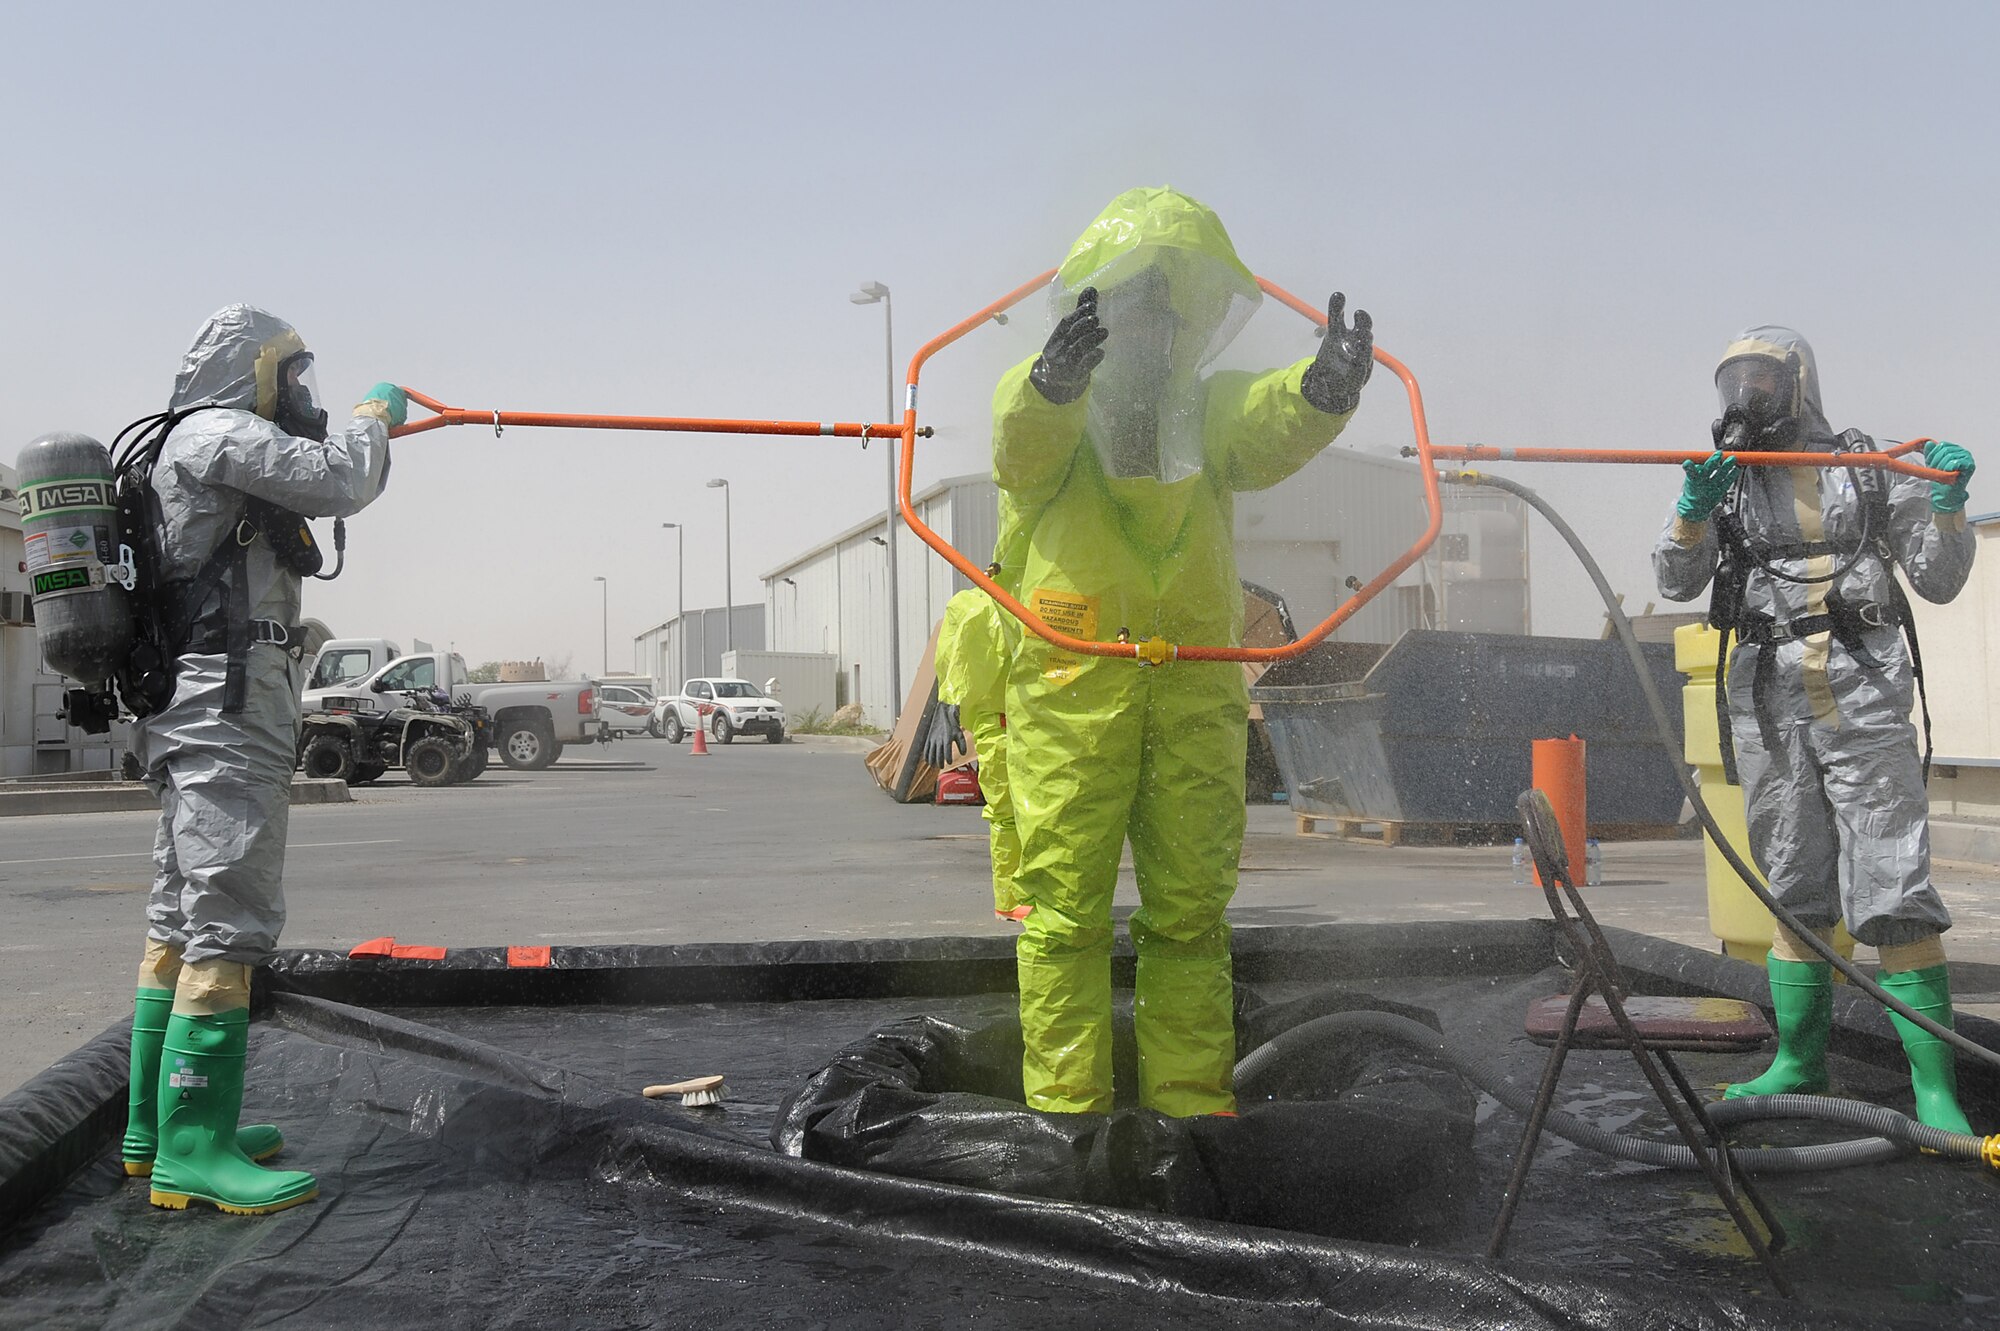 Senior Airman Bradley Cook processes through a decontamination area while Master Sgt. Jason Golden and Staff Sgt. Bobo wash off his level-A hazmat suit of contaminants during hazmat decontamination training, May 2 at an undisclosed location in Southwest Asia. All three Airmen are with the 380th Expeditionary Civil Engineer Squadron Readiness and Emergency Management Flight. The flight performs Chemical, Biological, Radiological, and Nuclear (CBRN) detection and decontamination operations as well as emergency management command and control. (U.S. Air Force photo by Senior Airman Brian J. Ellis) (Released)